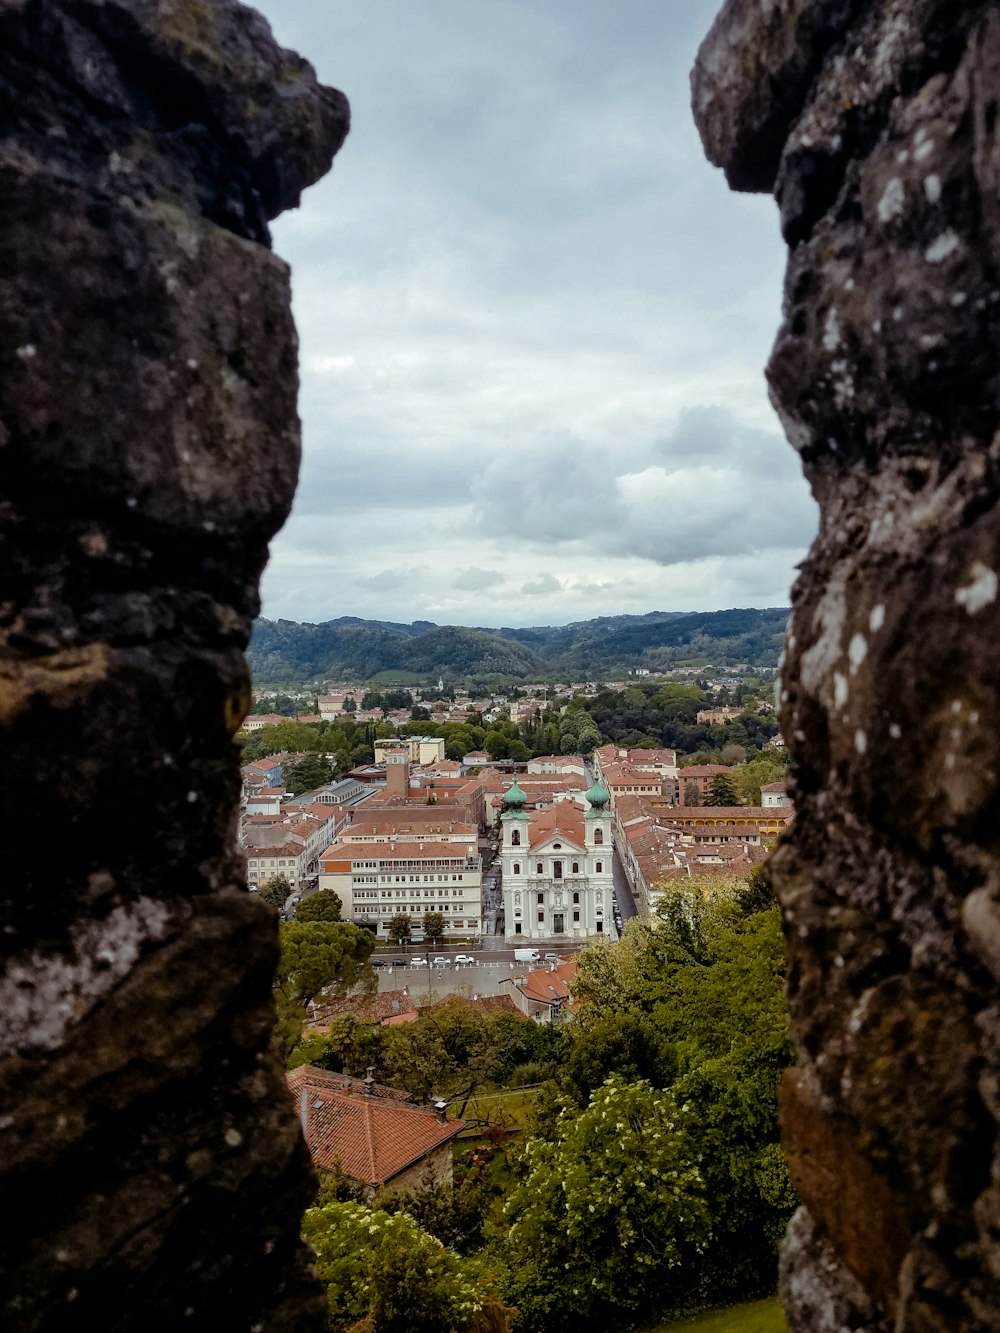 a view of a city from a window in a castle